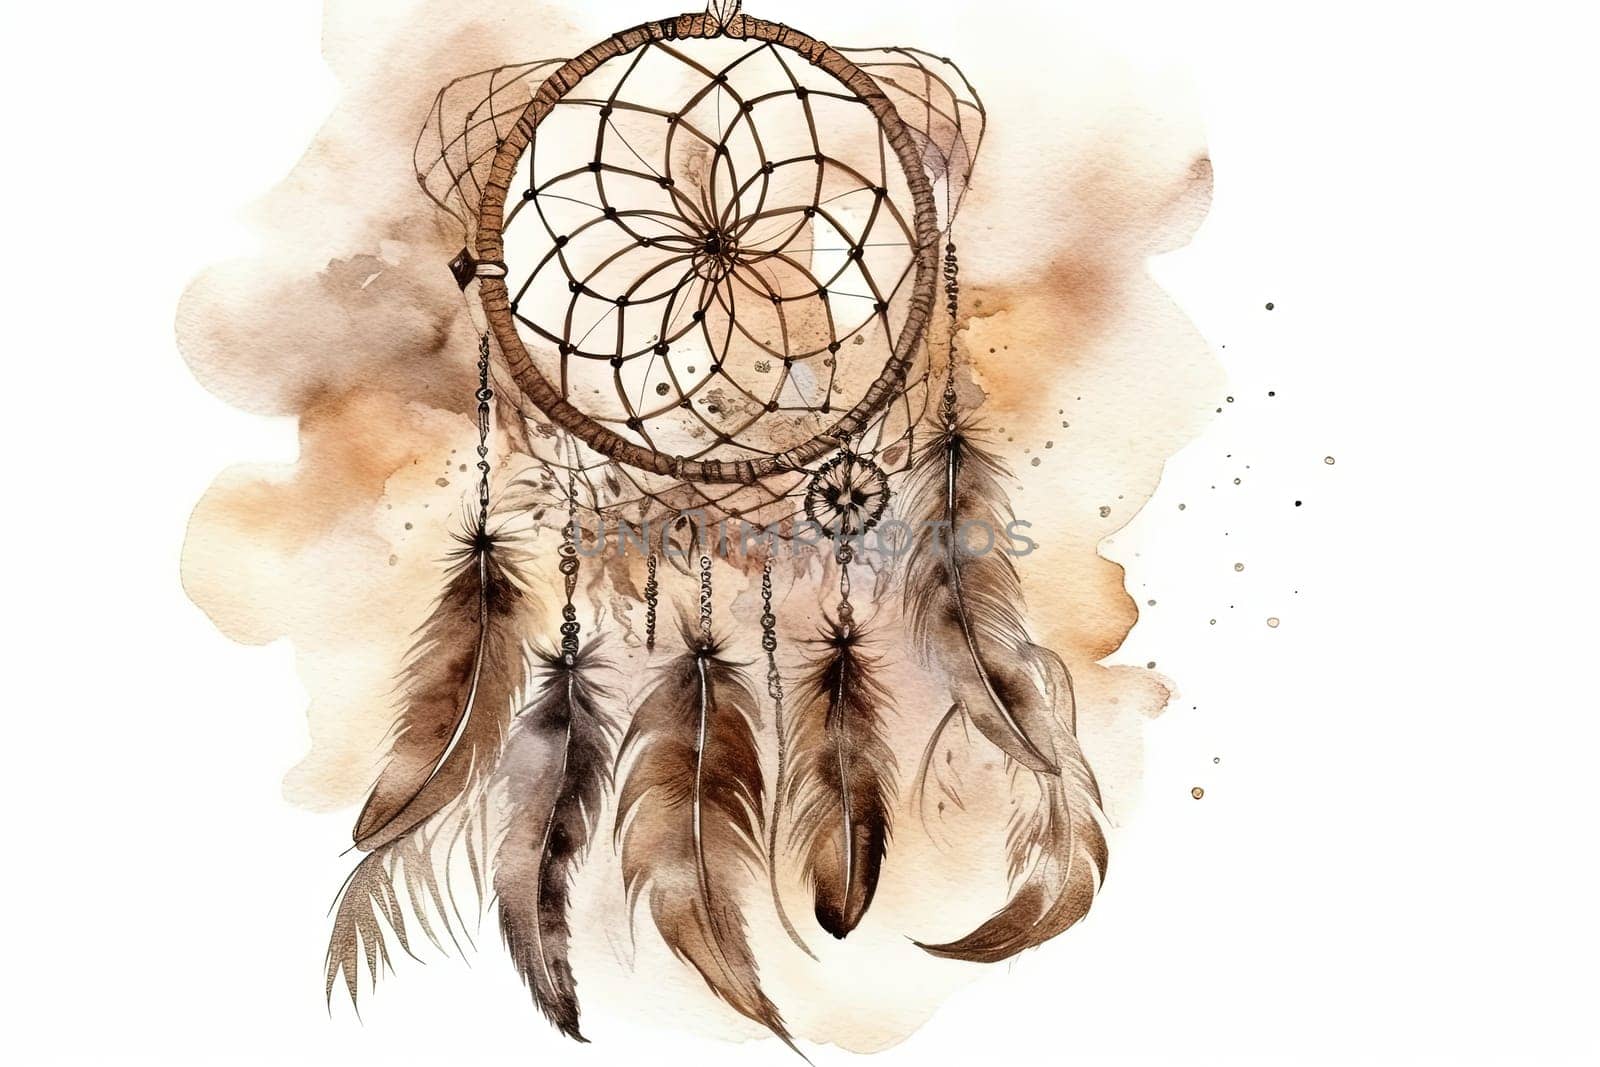 Watercolor Illustration Of Boho-Style Dreamcatcher With Feathers by GekaSkr